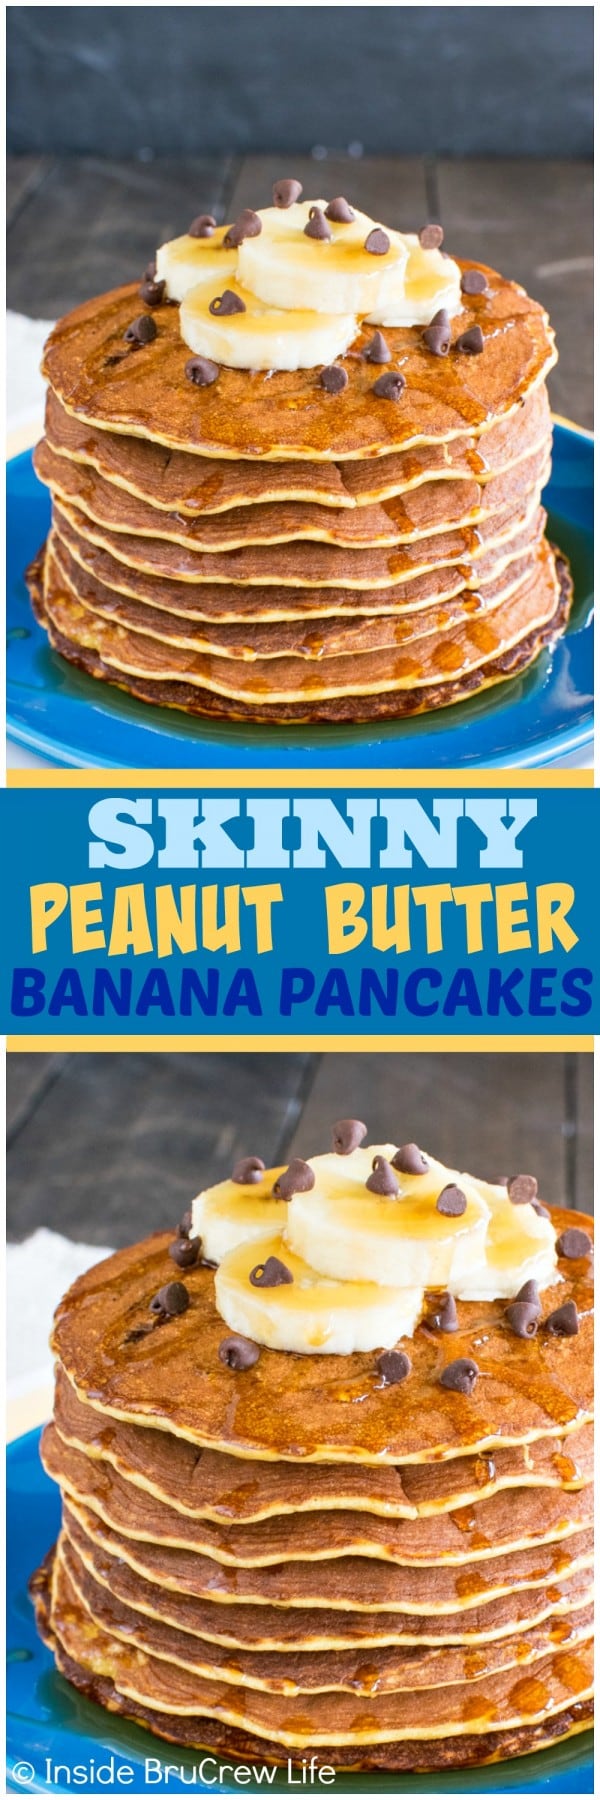 Skinny Peanut Butter Banana Pancakes - these easy pancakes are made with eggs, bananas, and peanut butter powder. Perfect healthy recipe to start out the day!